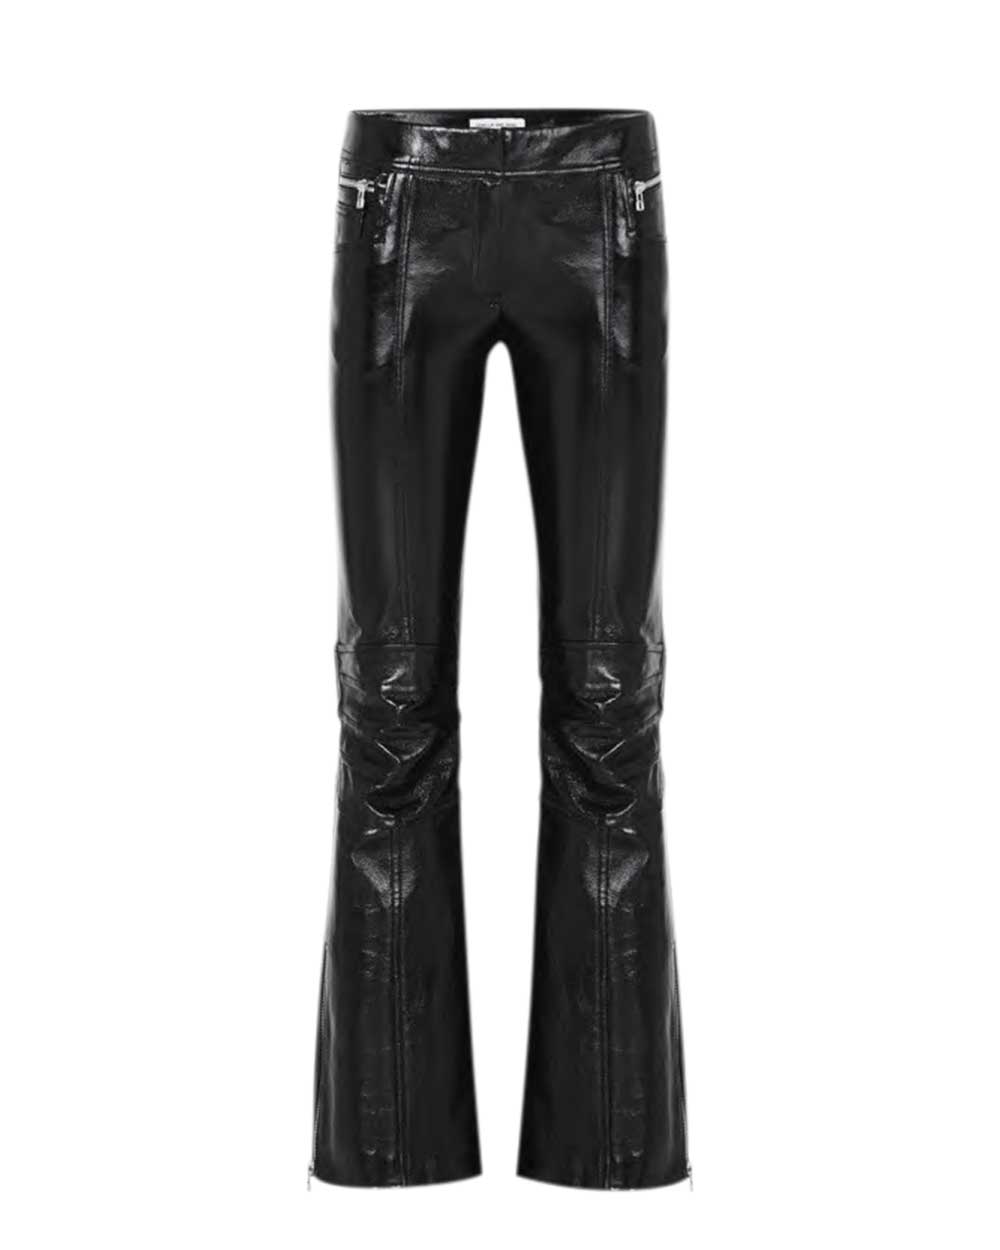 Camilla and Marc trousers, $2160